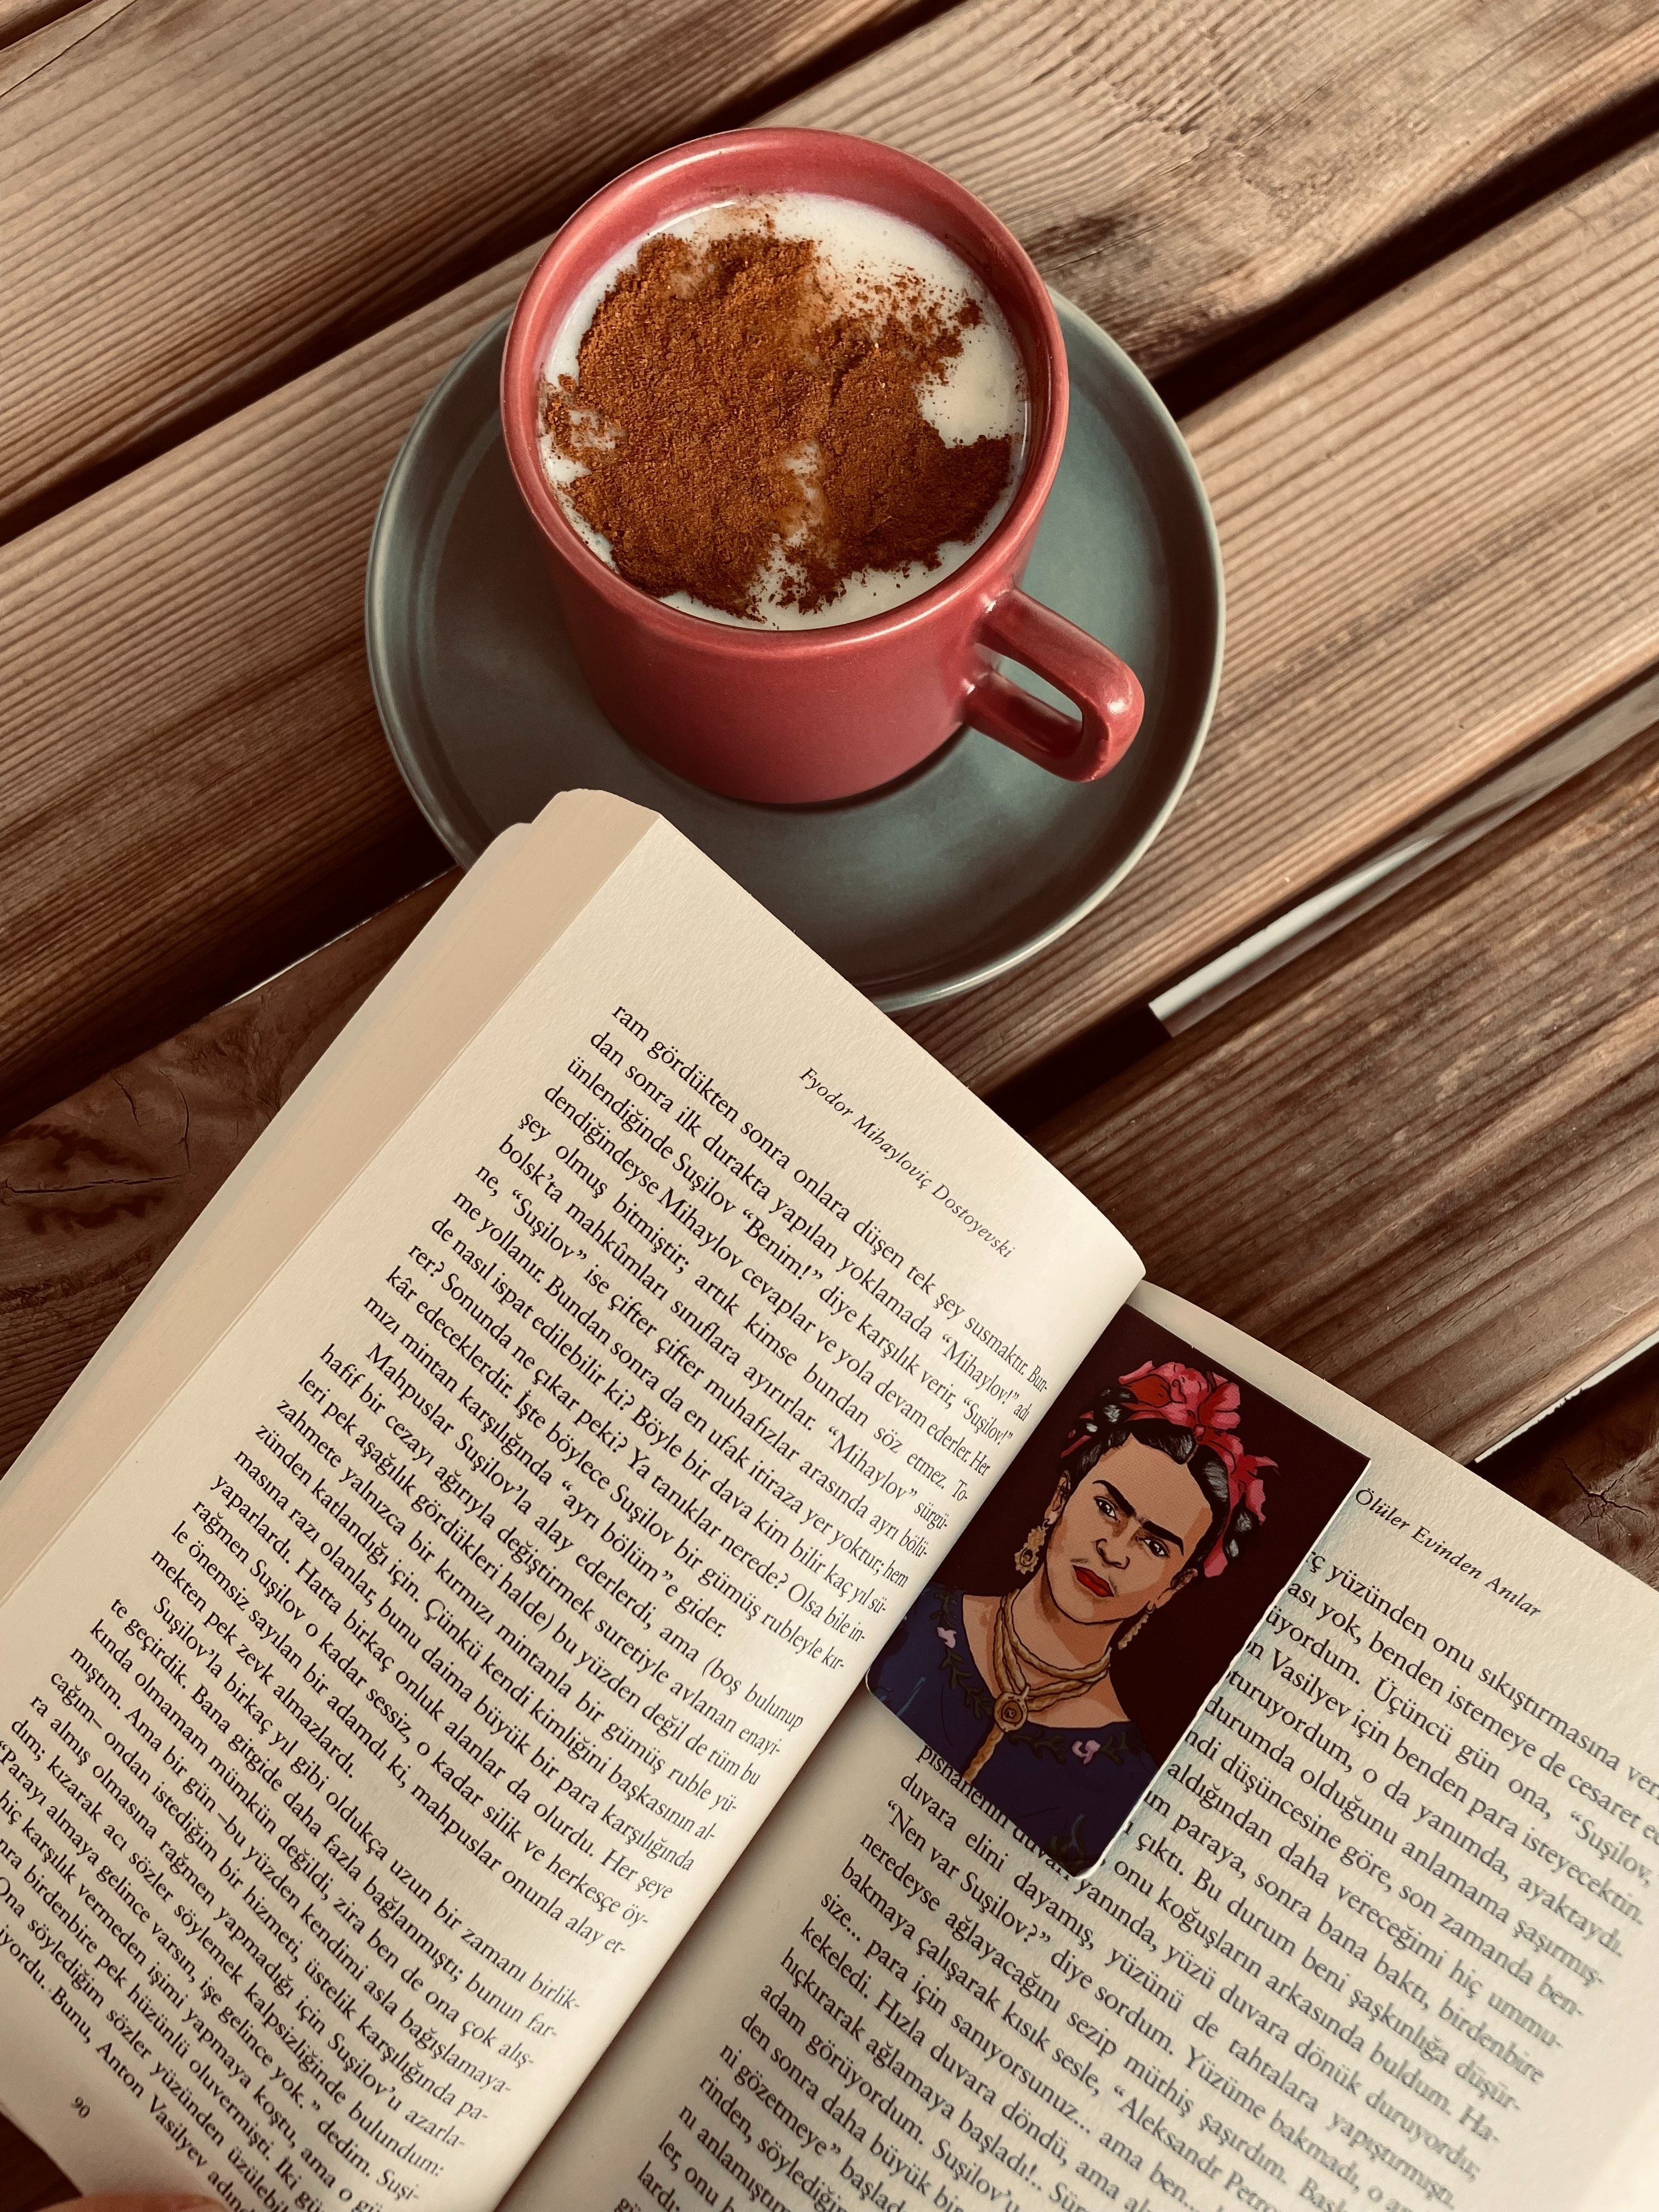 A book open to a page with Frida Kahlo on it, with a cup of coffee on a saucer next to it. - Cozy, Frida Kahlo, books